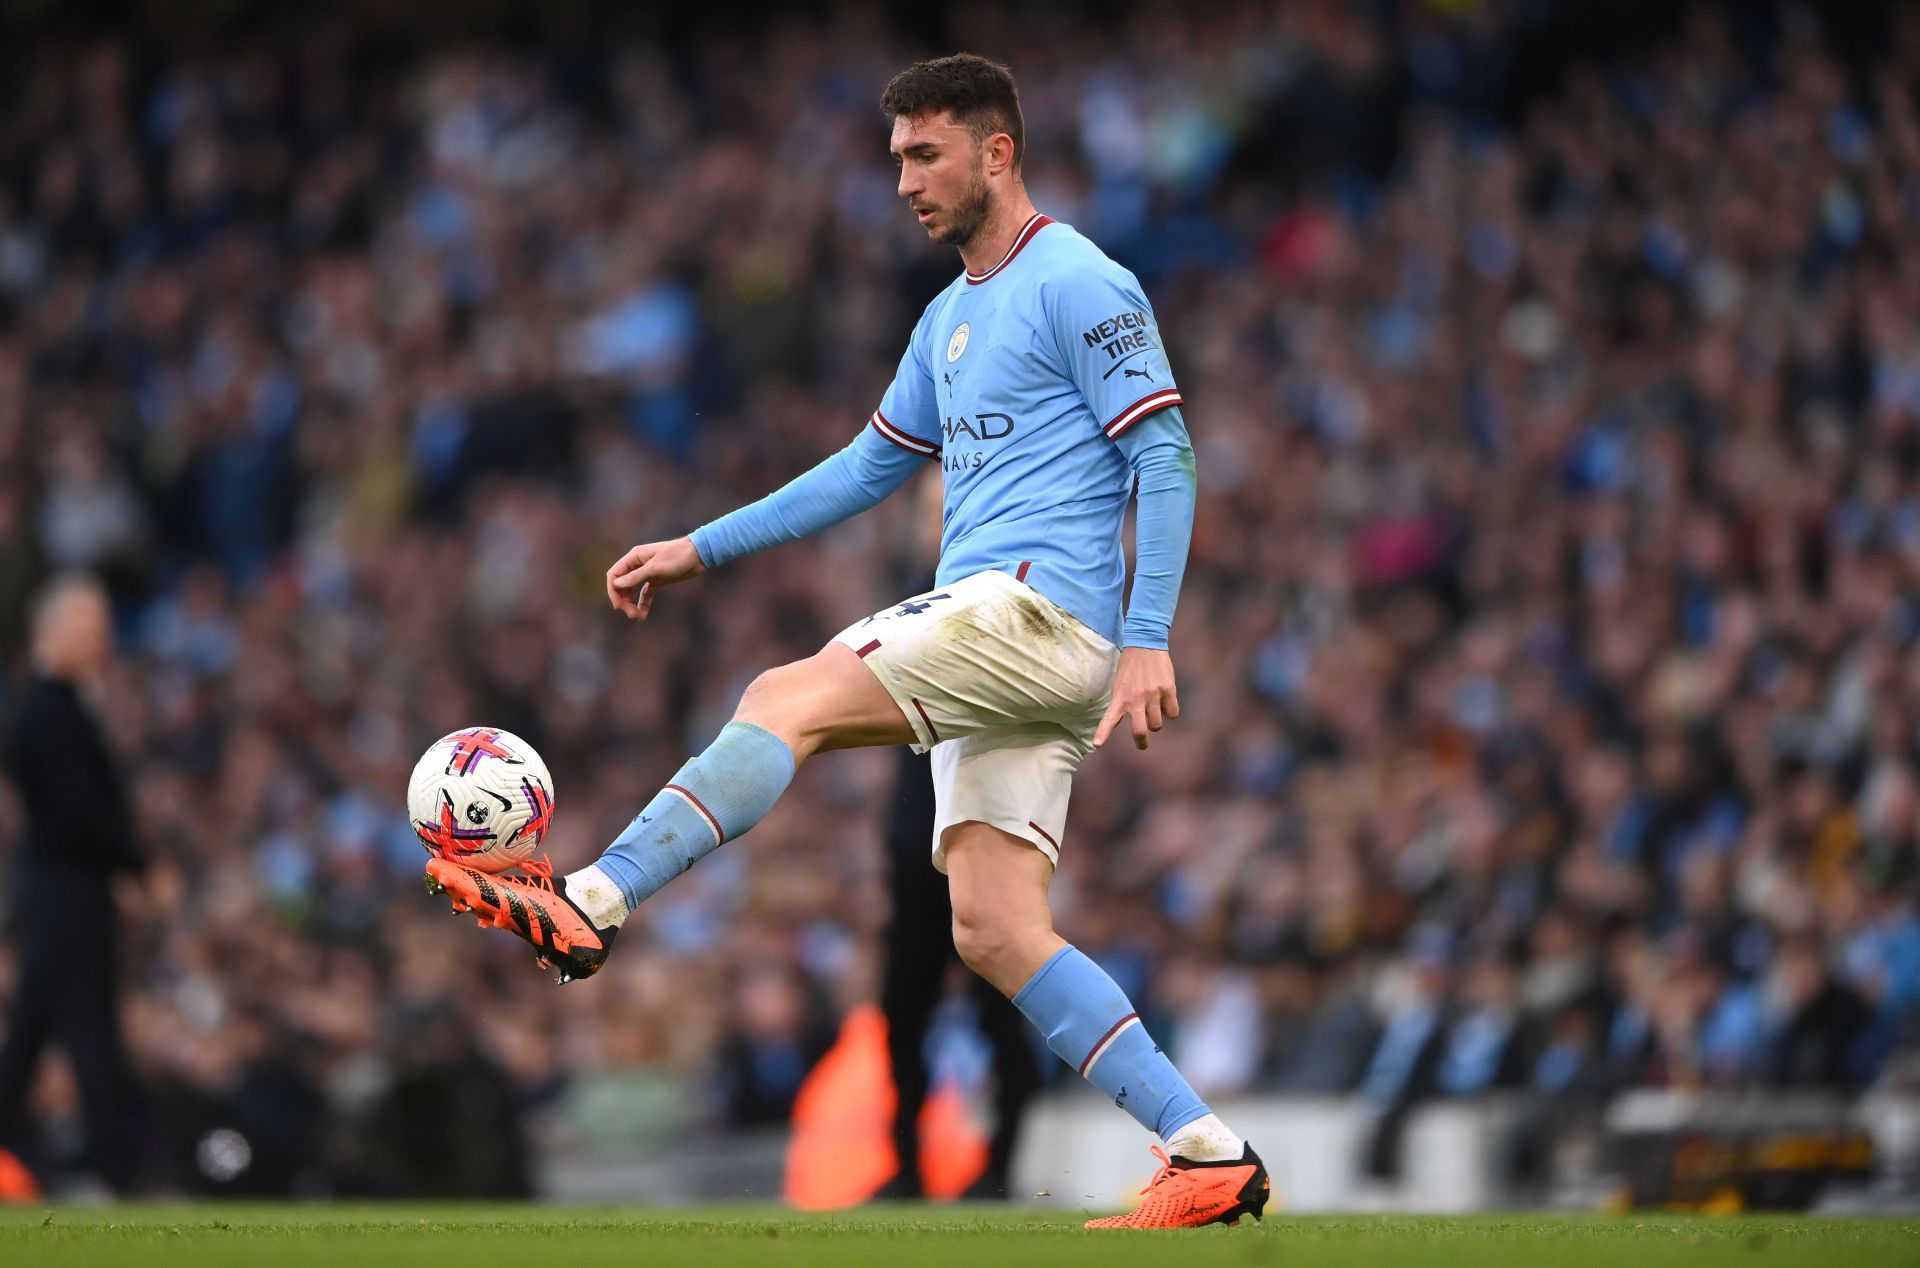 Aymeric Laporte desires a move to Barcelona.